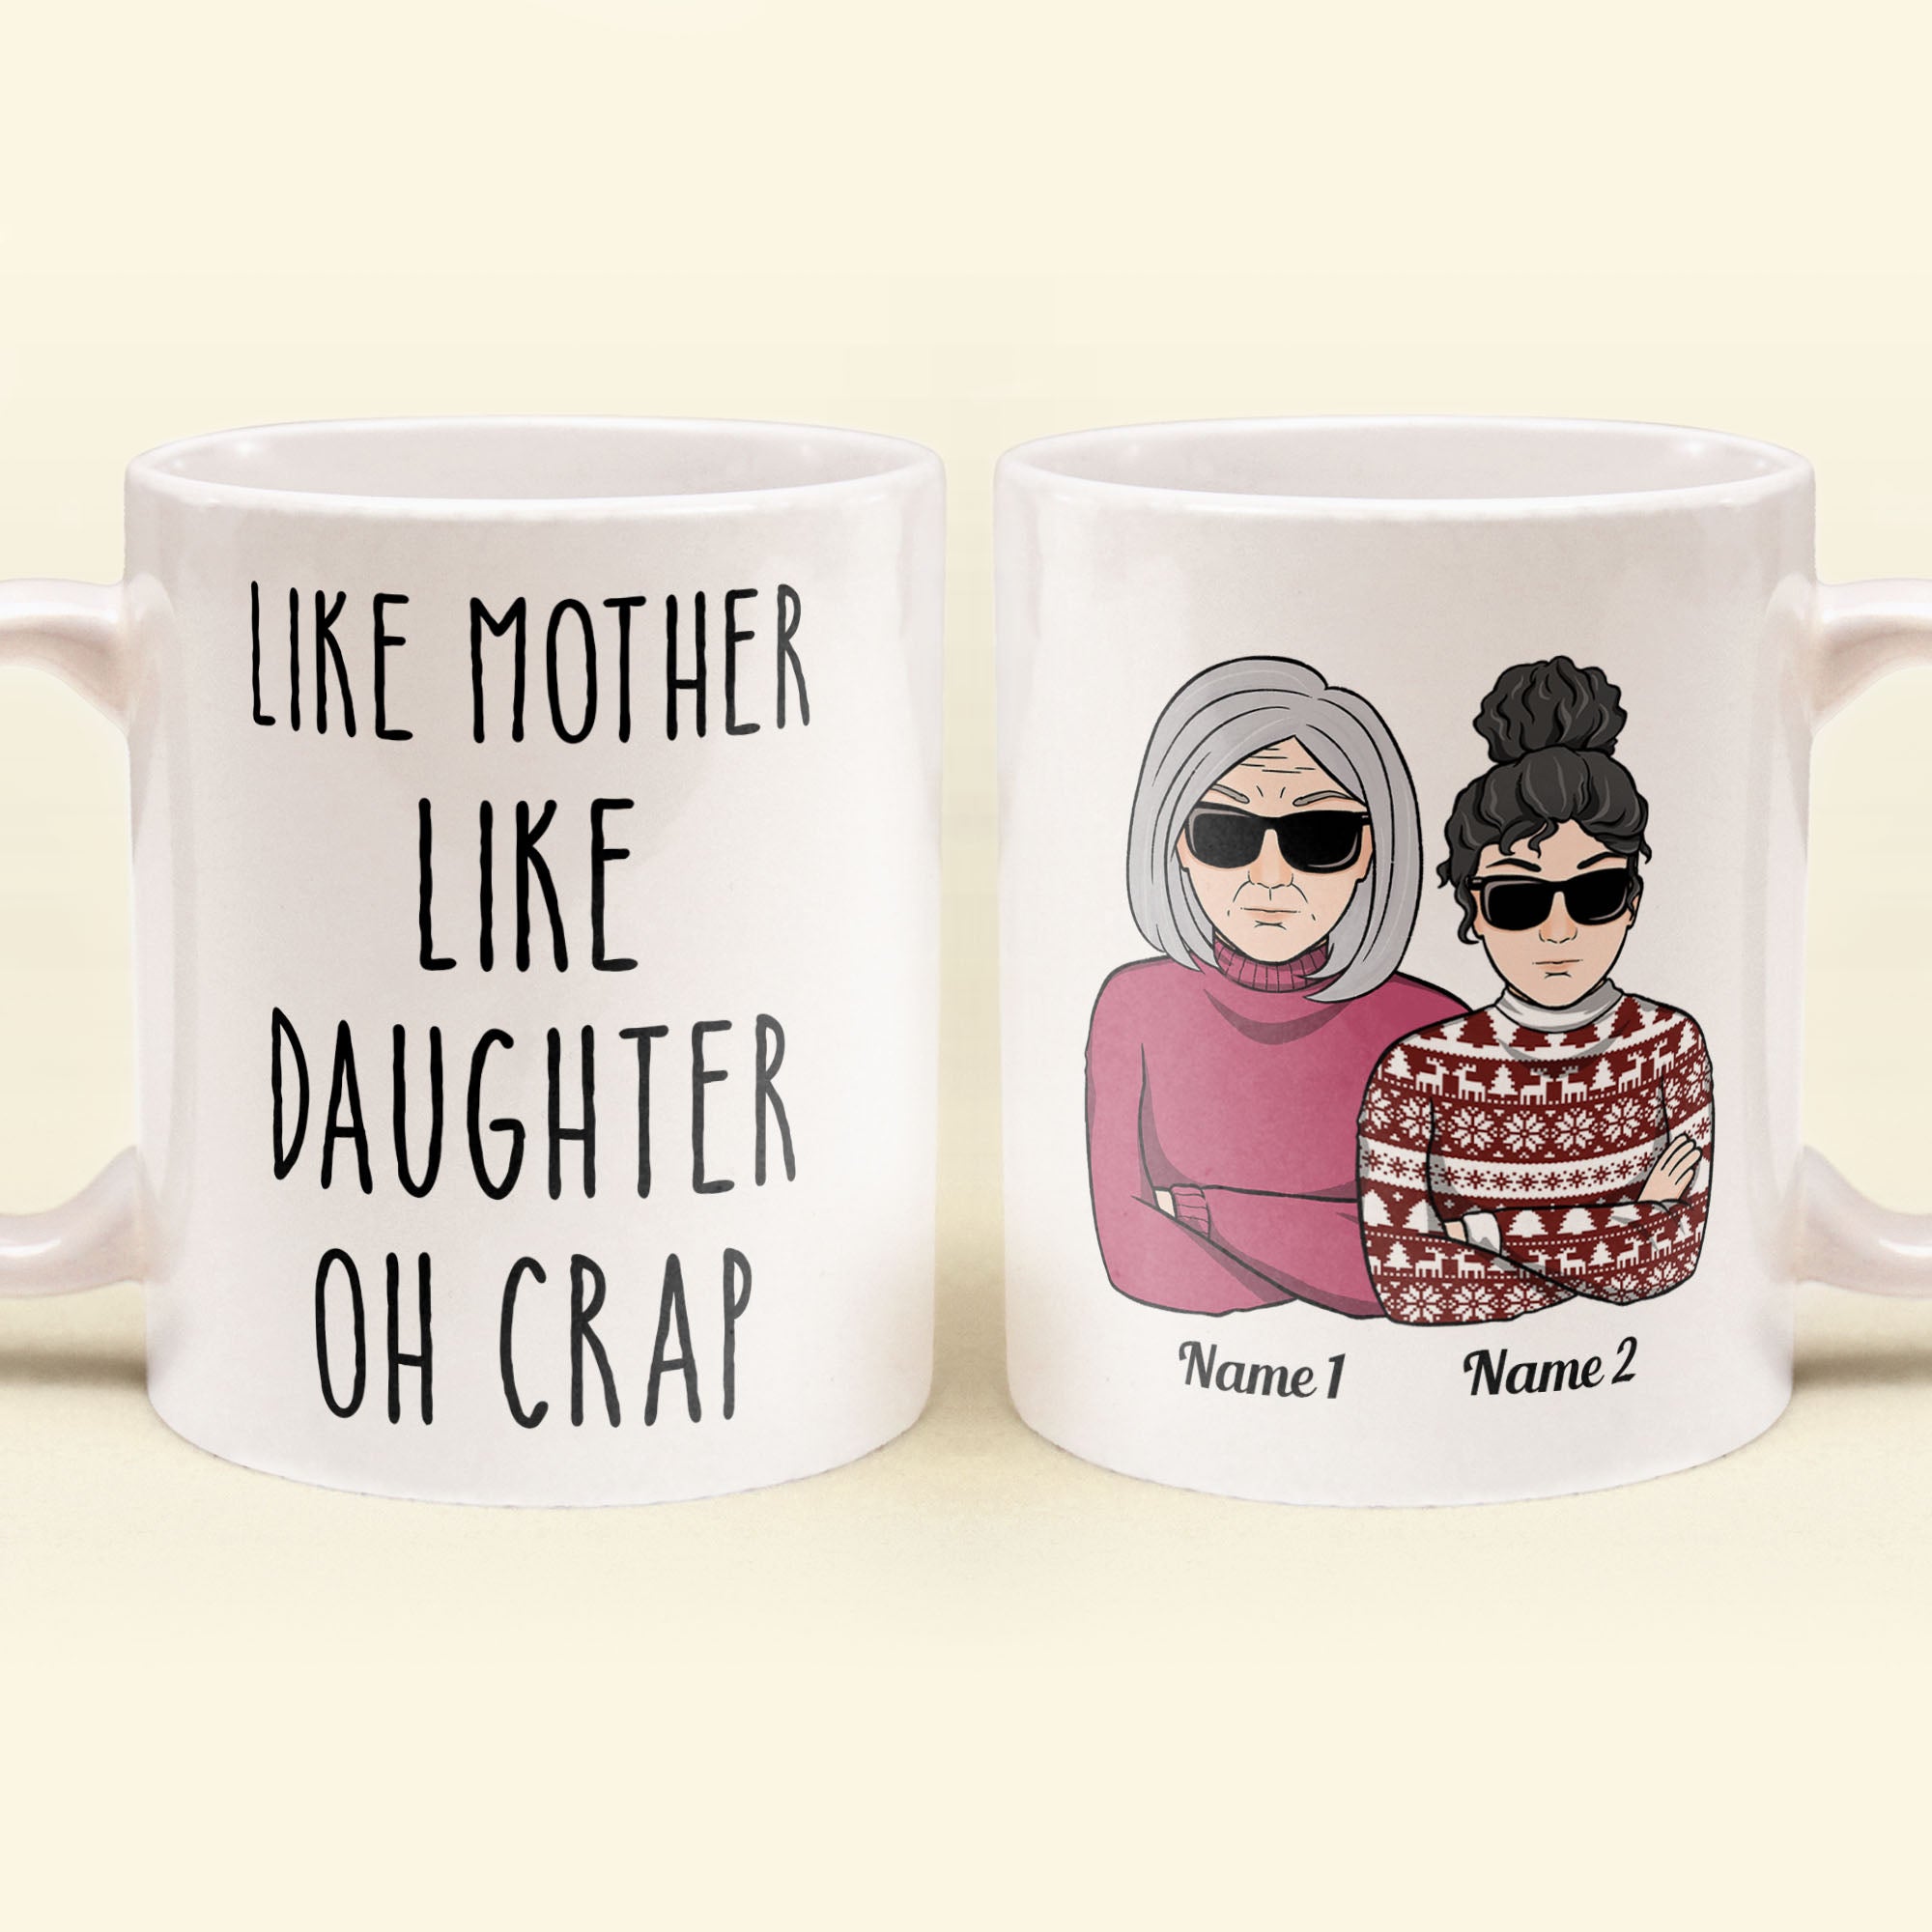 Personalized Mug - Mother & Daughters (CB) - Like mother like daughter oh  crap